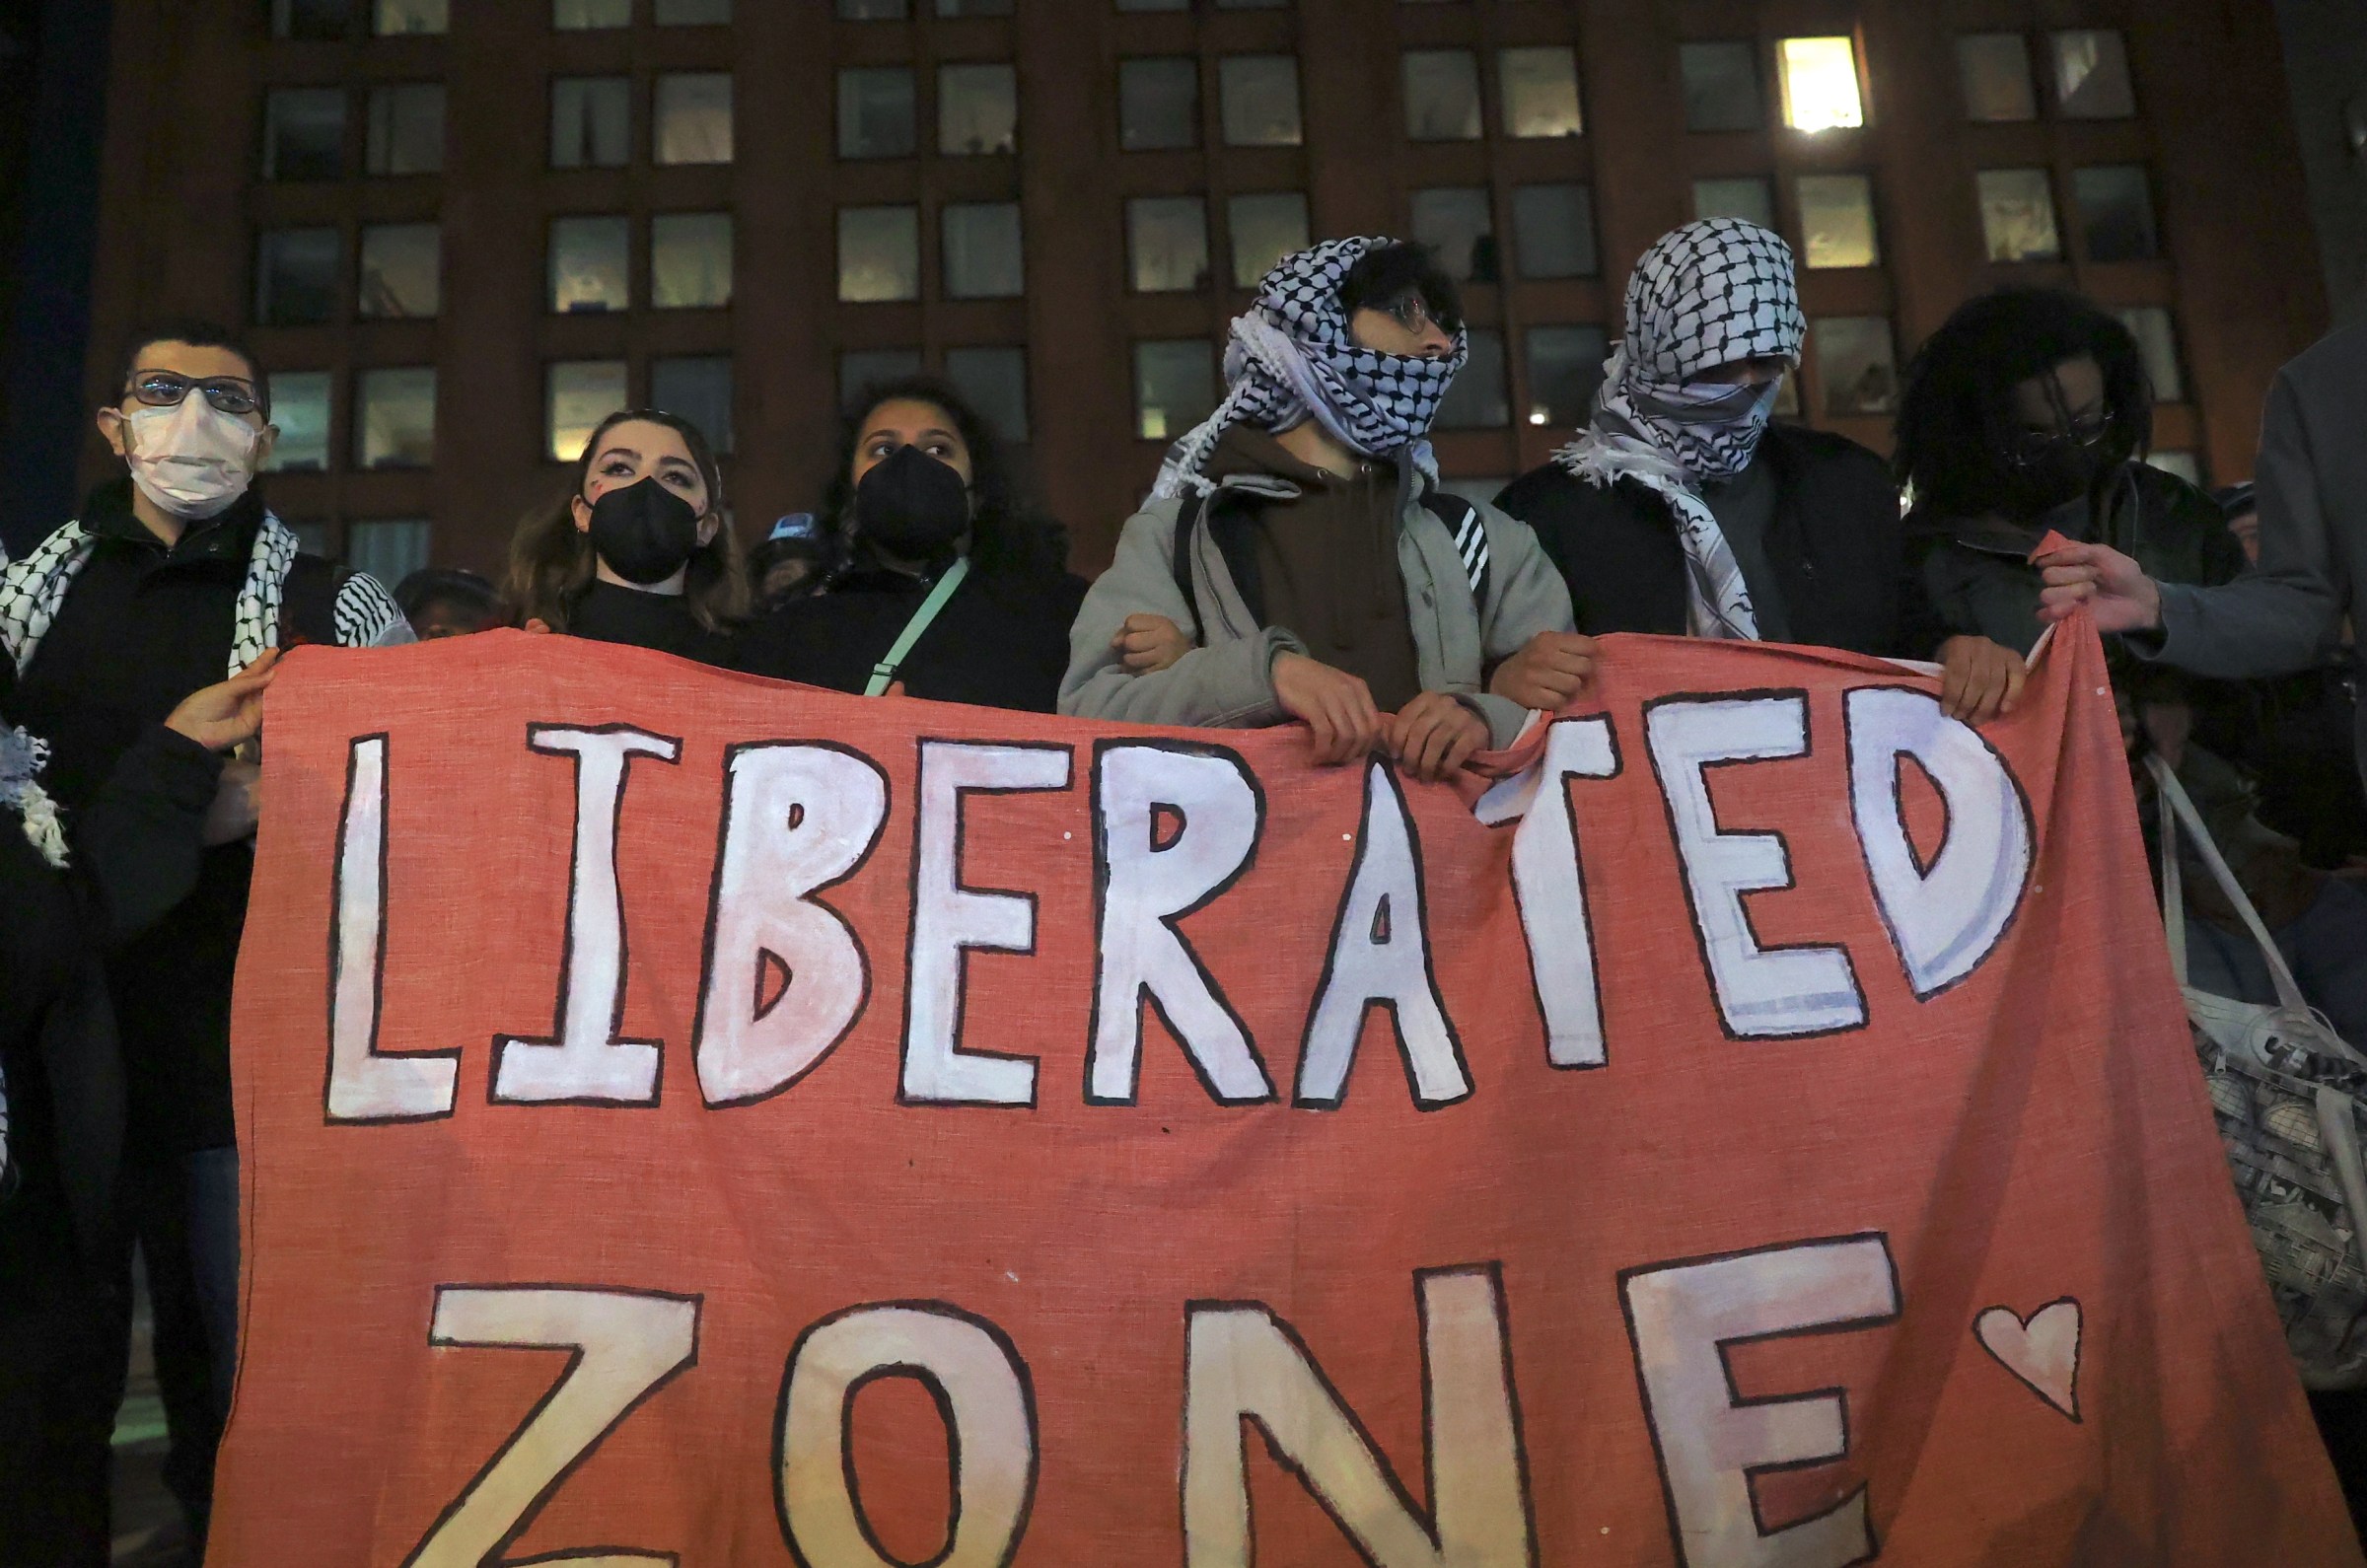 What the backlash to student protests over Gaza is really about